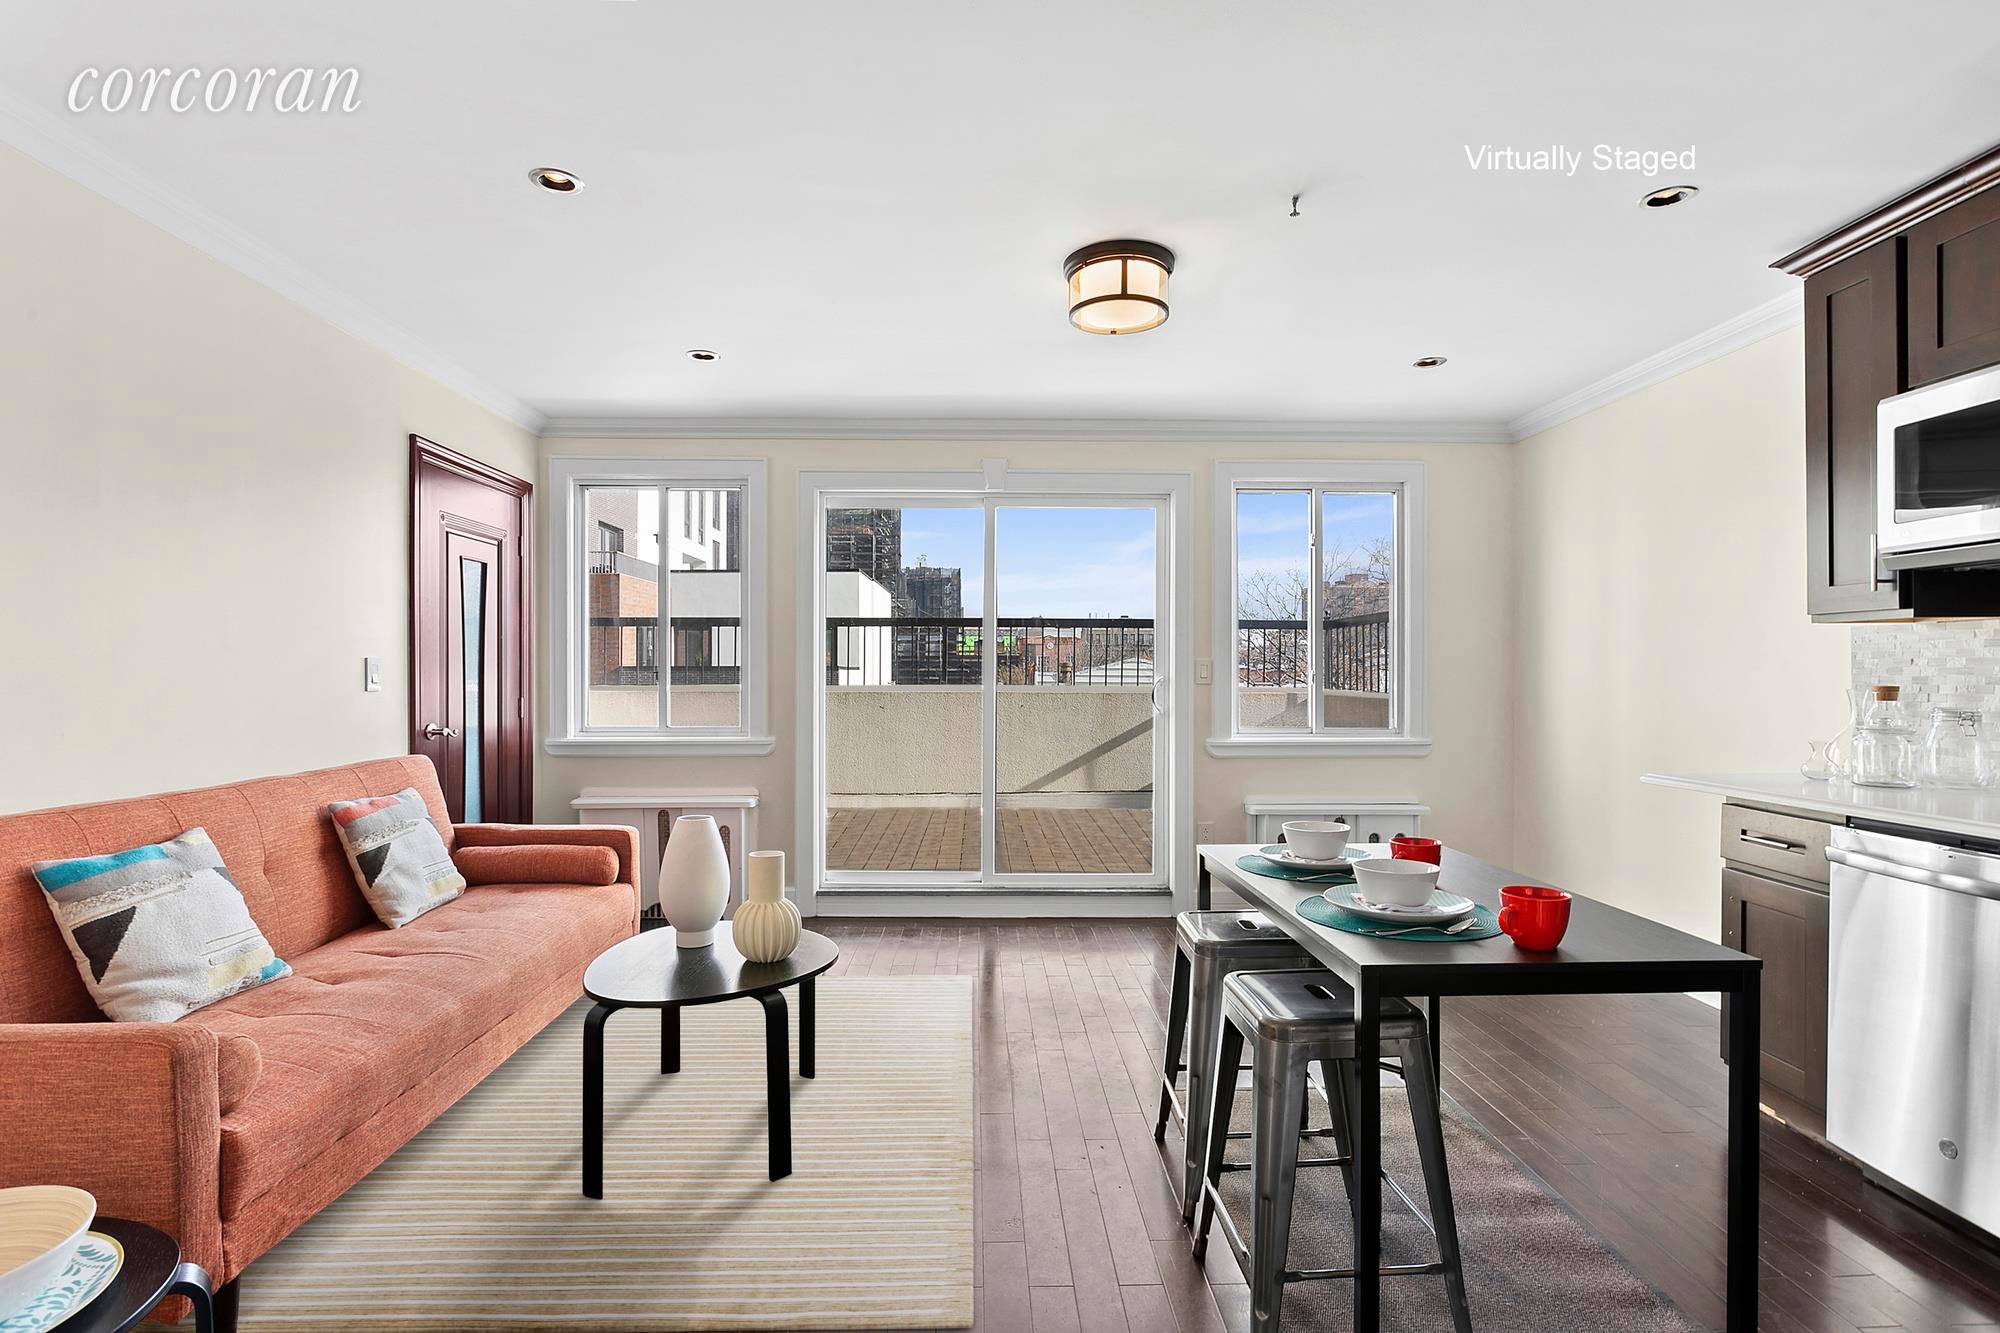 180 19th Street 7 in Brooklyn is a rare South Park Slope condo with over 1, 300 sq ft of private outdoor space including roof rights.